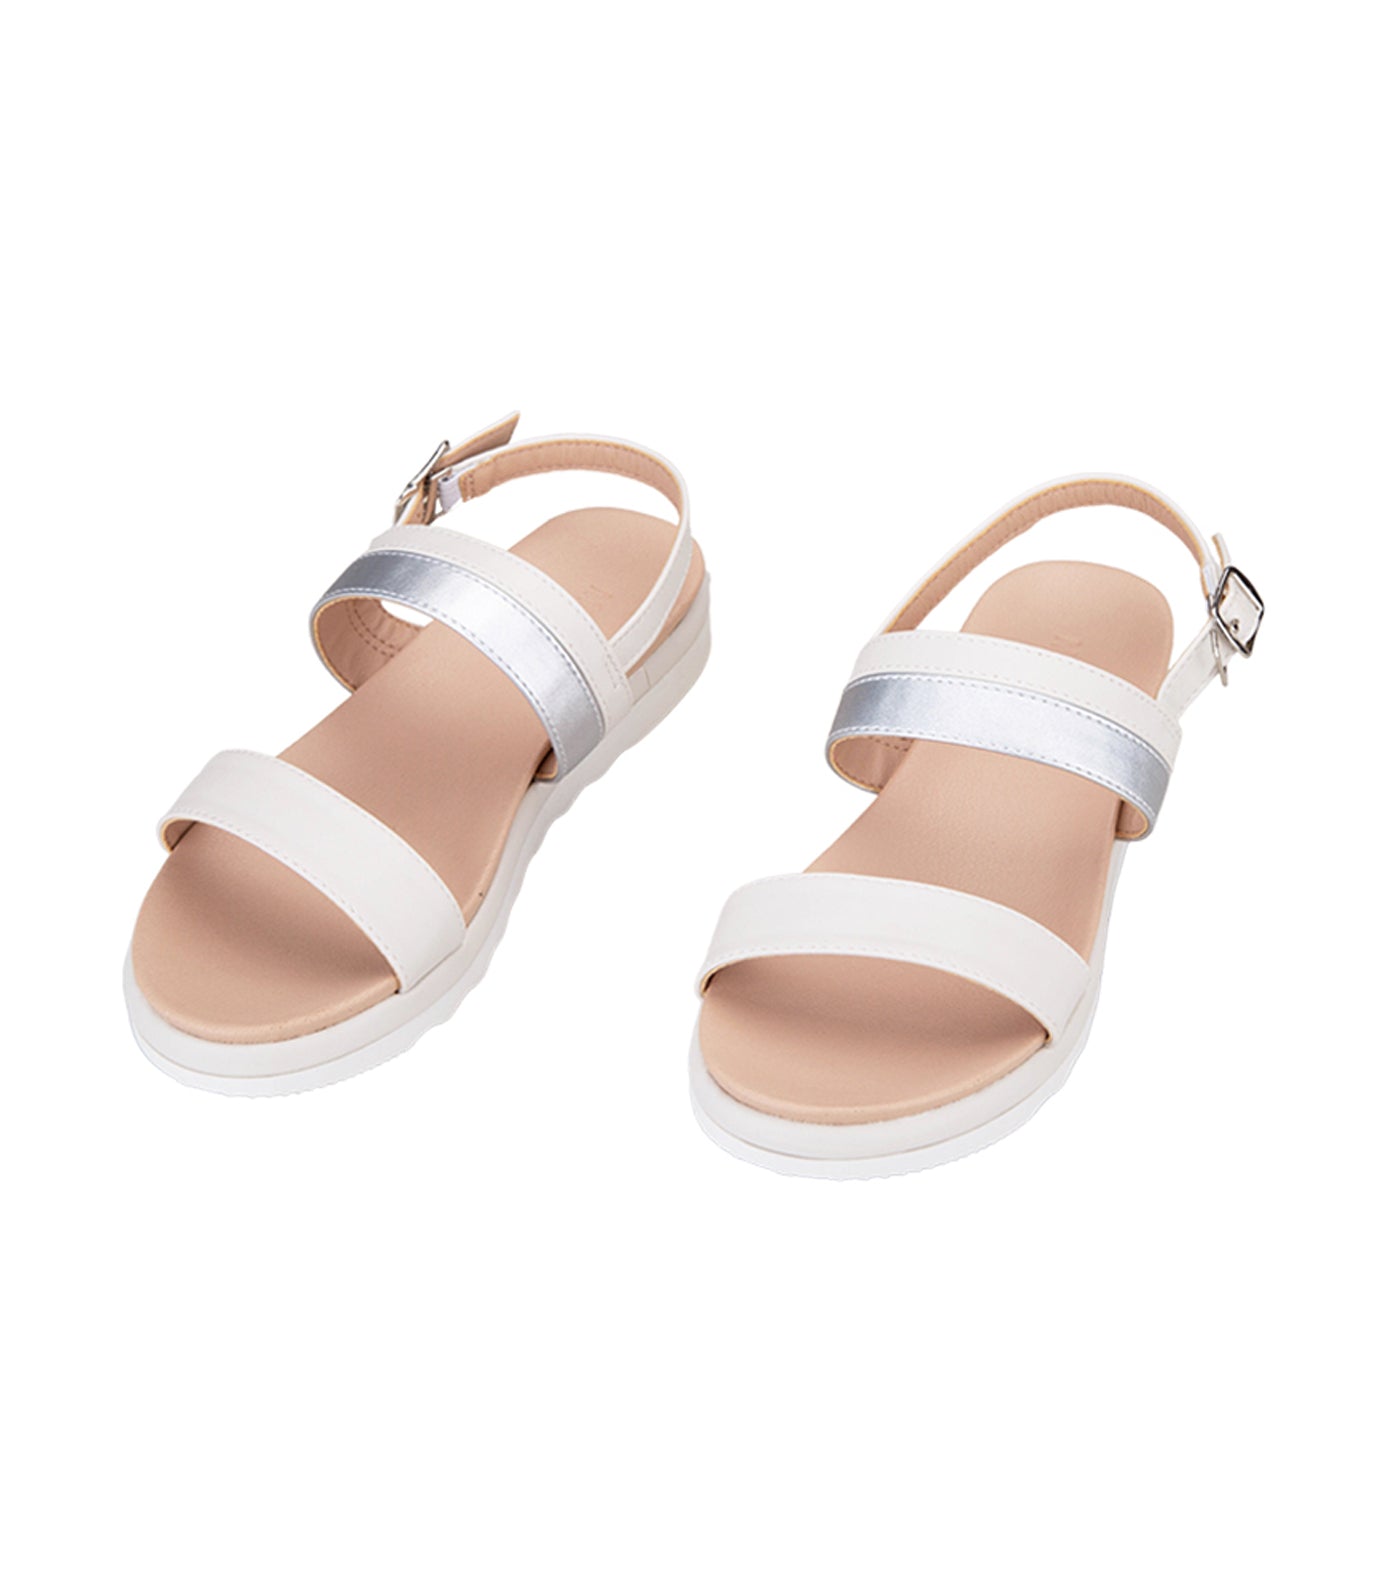 Blanche Kids Sandals for Girls - Silver